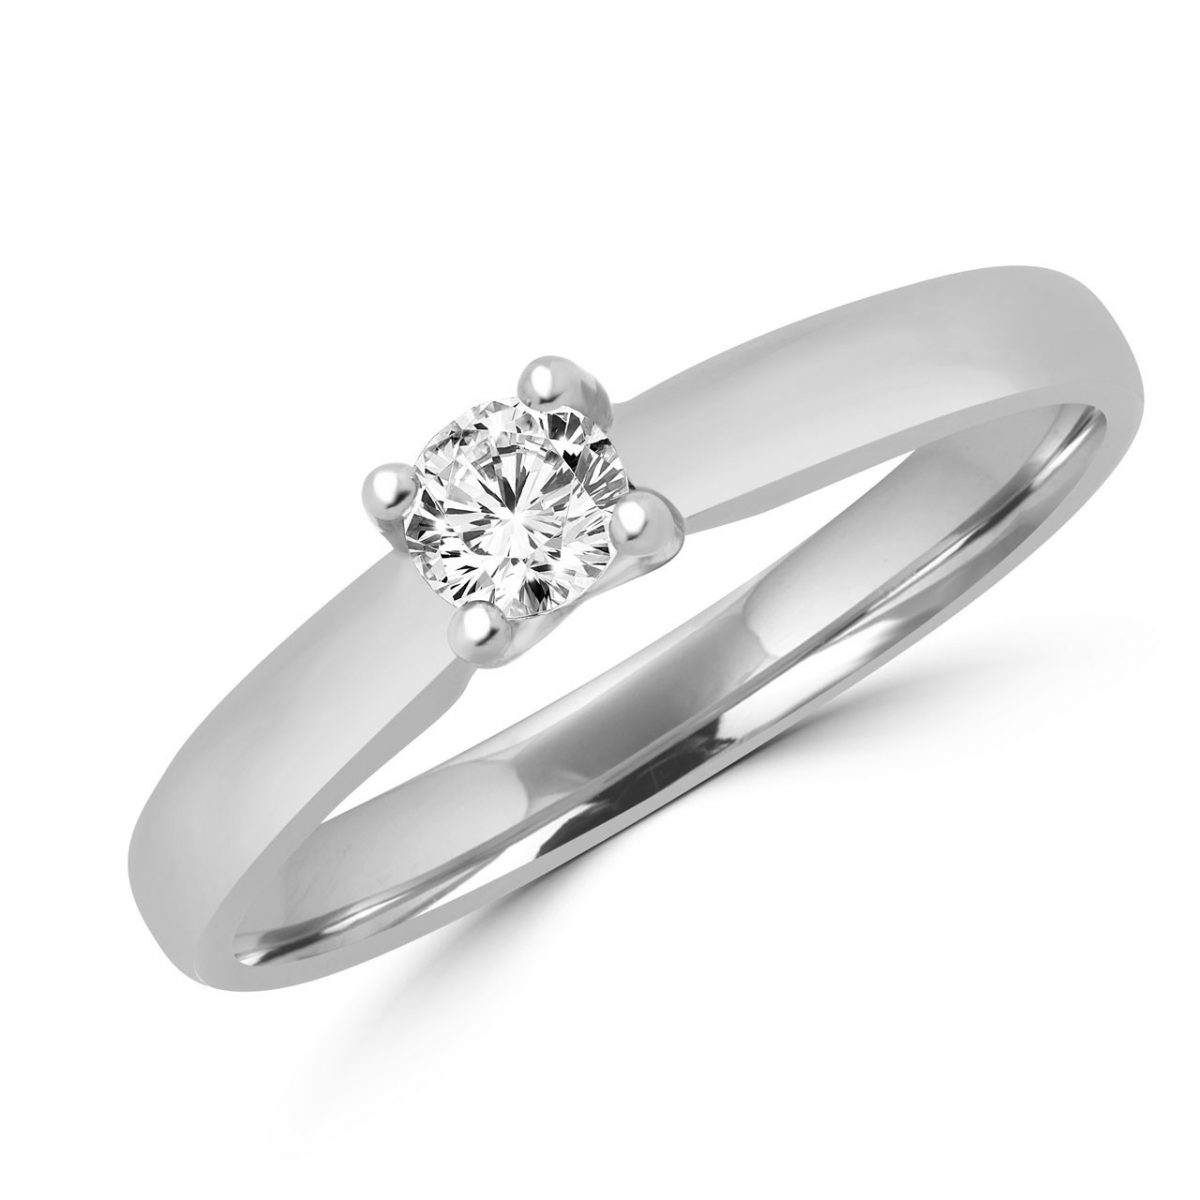 Striking solitaire engagement ring 0.15 (ctw) in 14k white gold